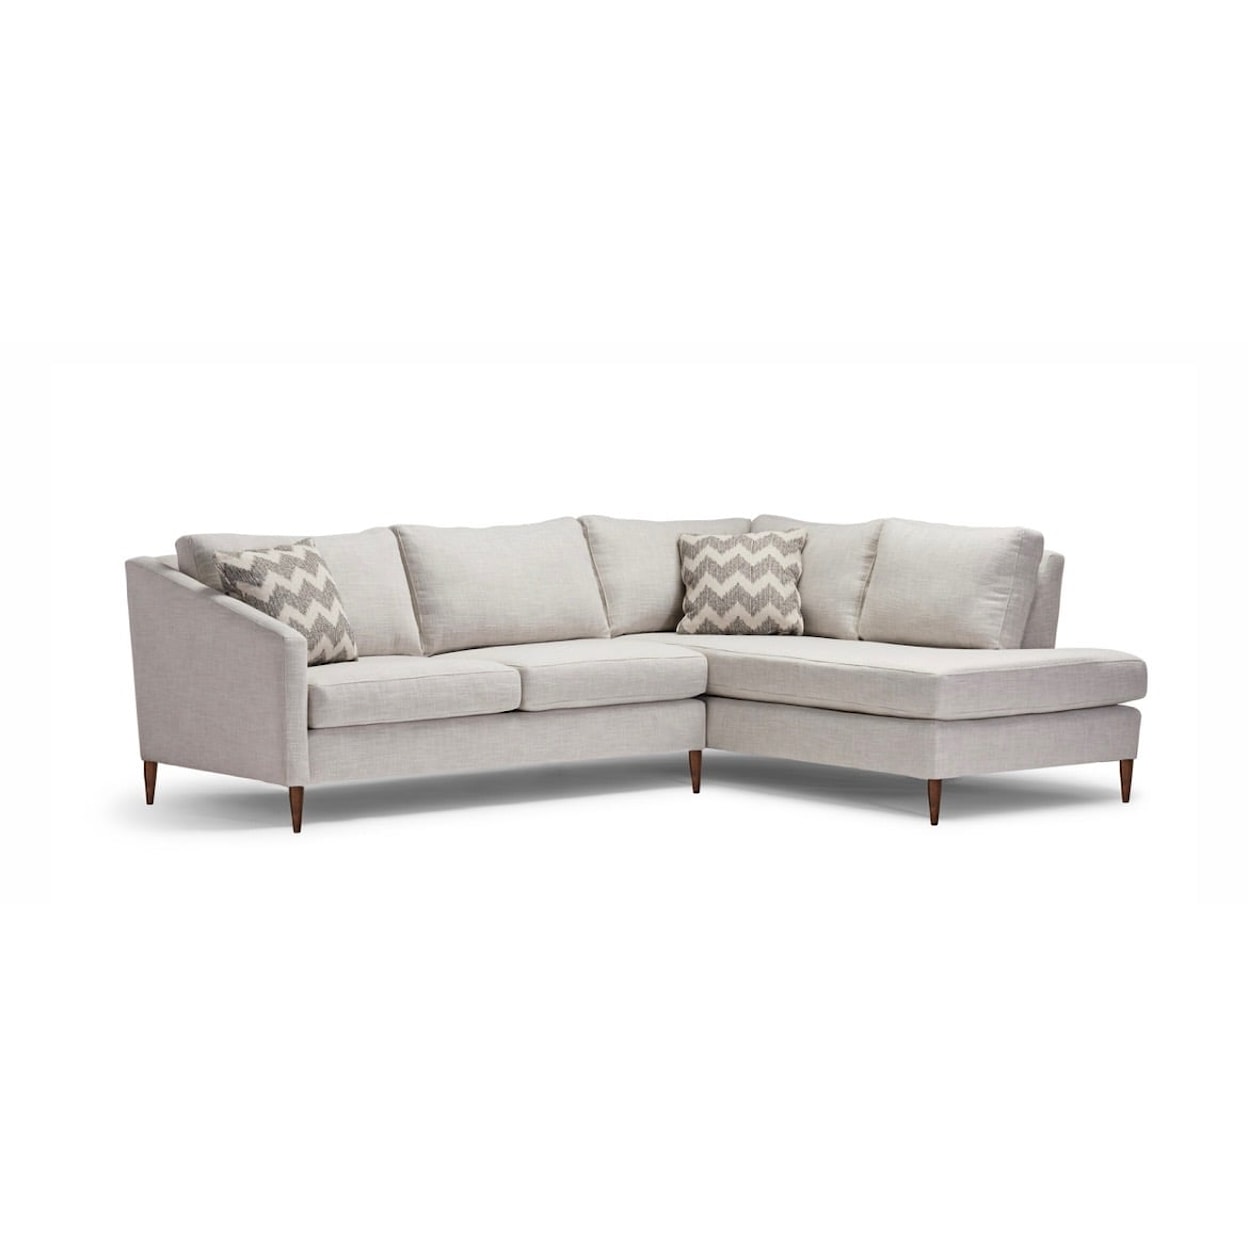 Lewis Home 9457 2 Piece Sectional